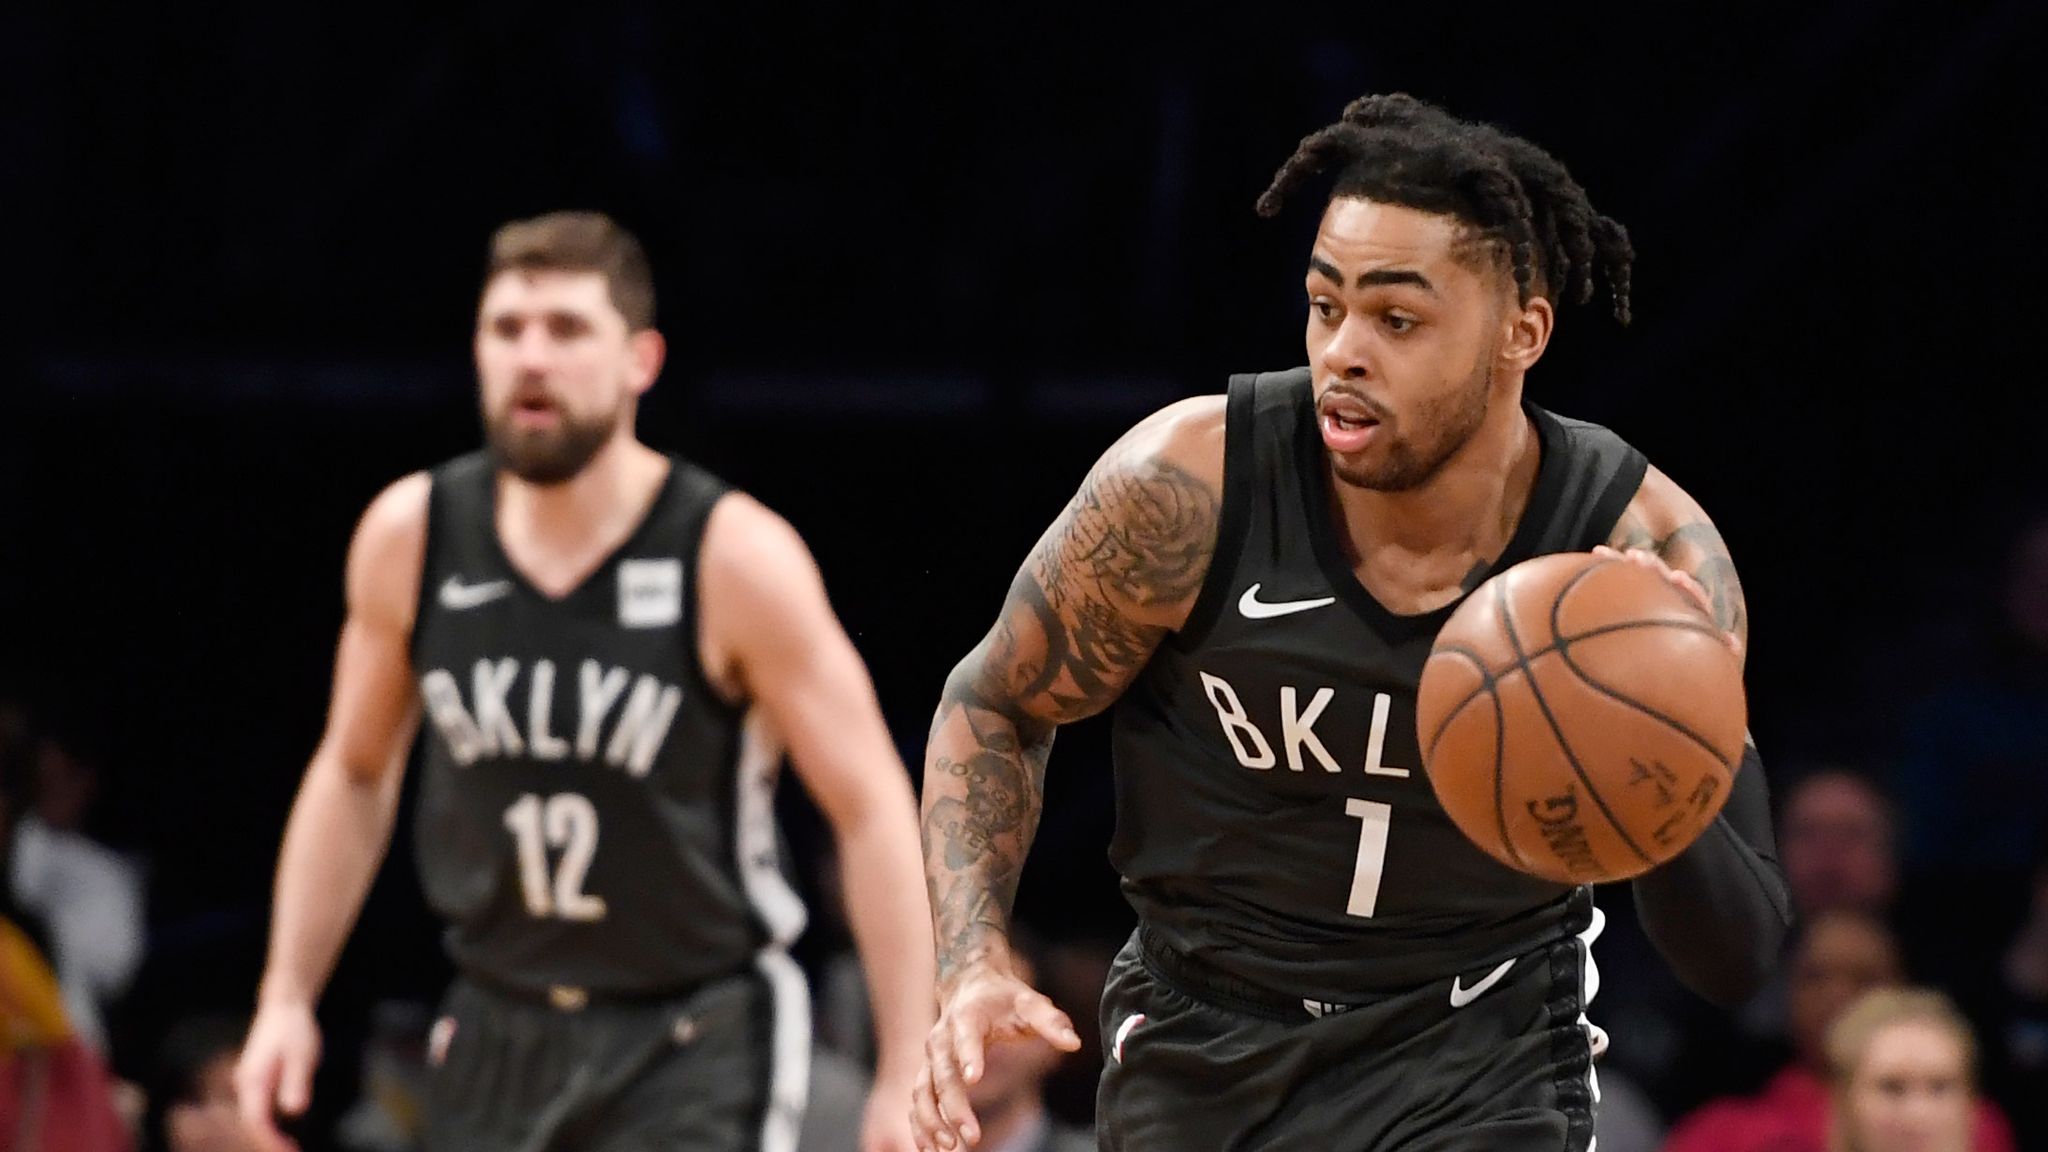 D'Angelo Russell: Top 5 moments with the Brooklyn Nets